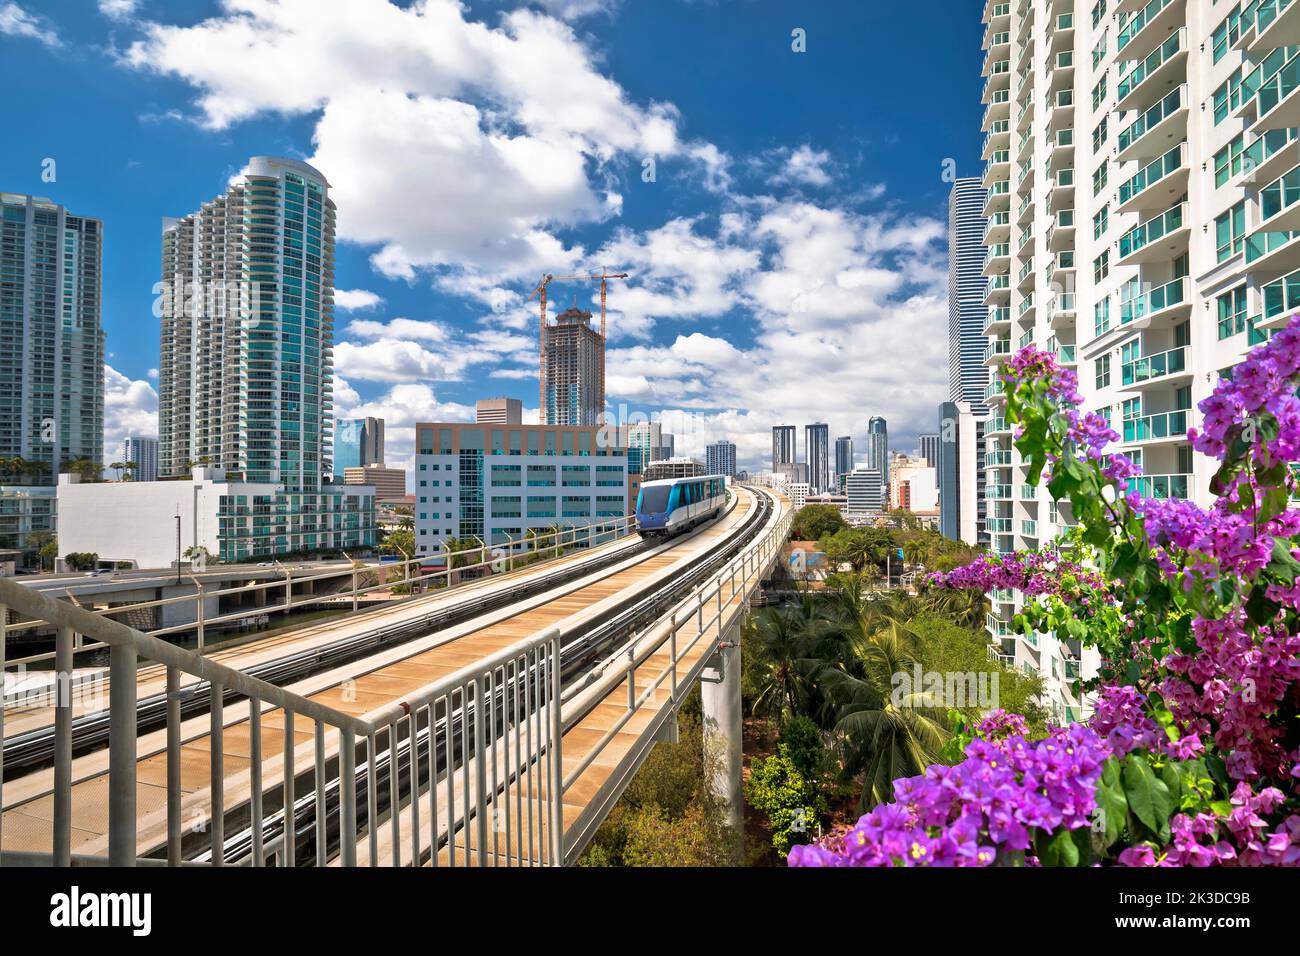 Miami downtown skyline and futuristic mover train colorful view, Florida state, United States of America Stock Photo